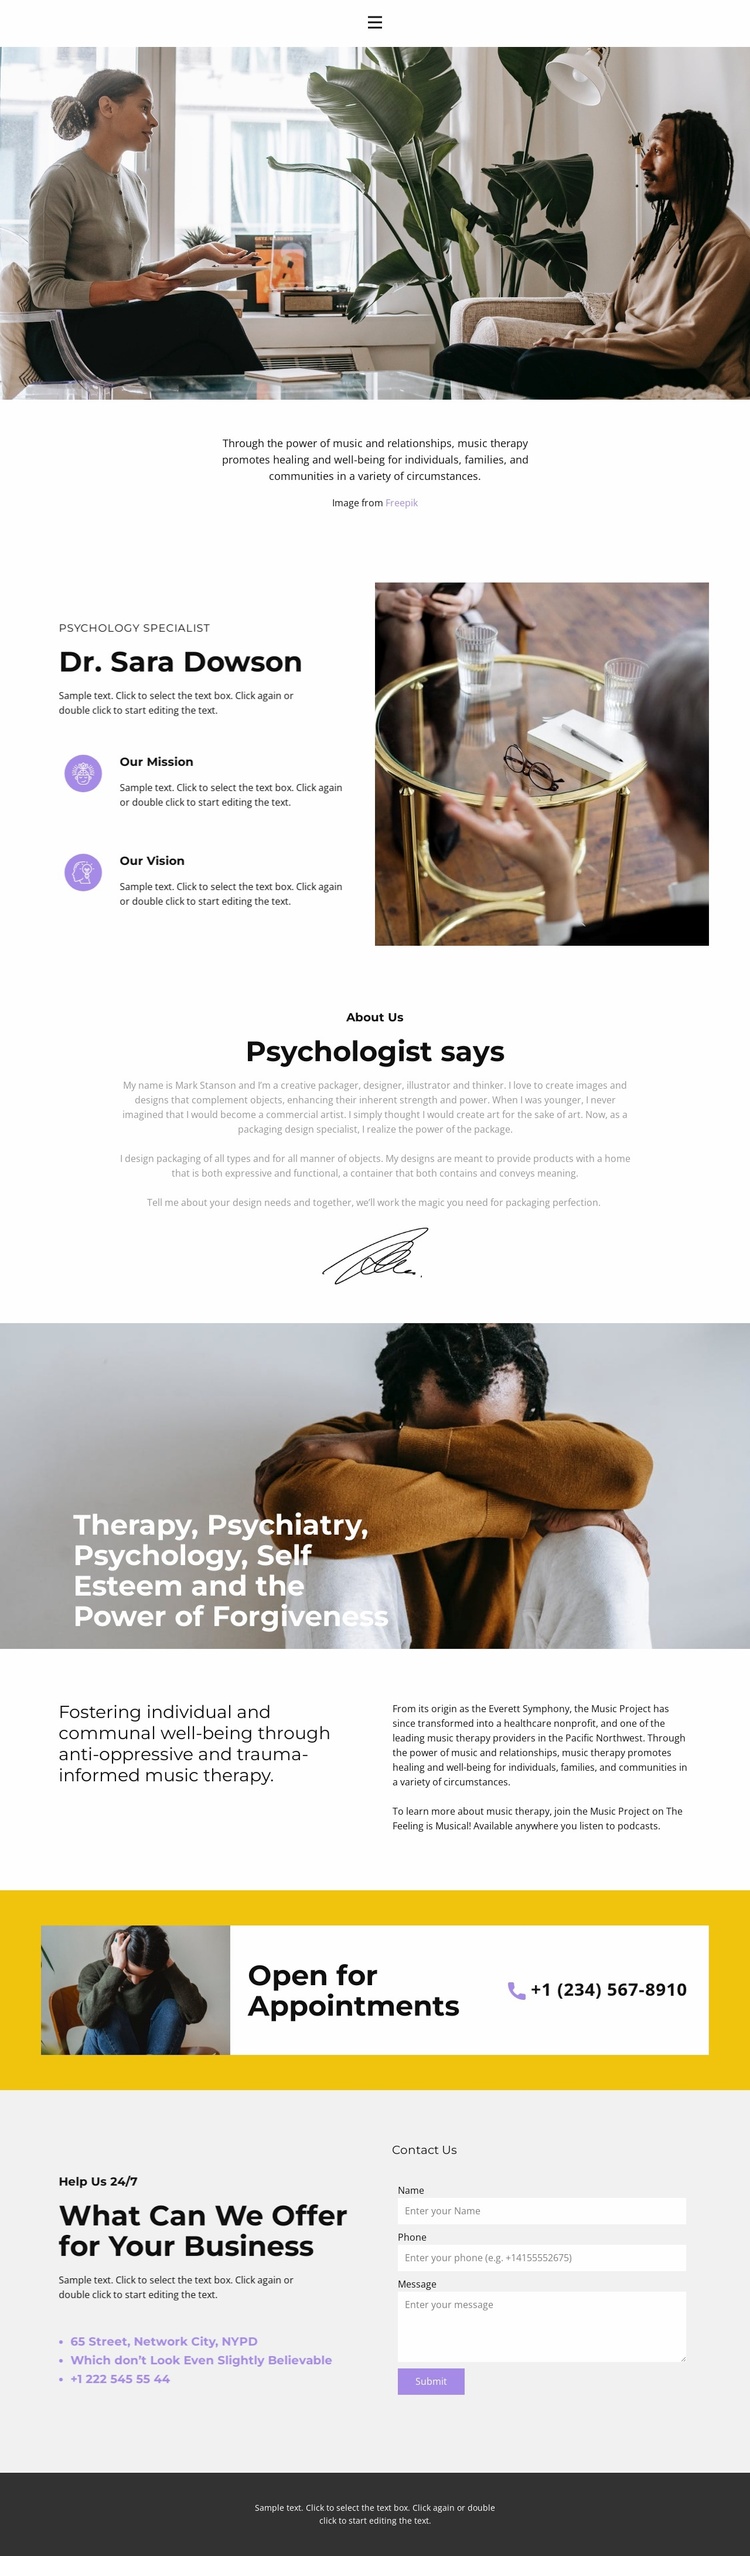 Qualified help from a psychologist Website Template